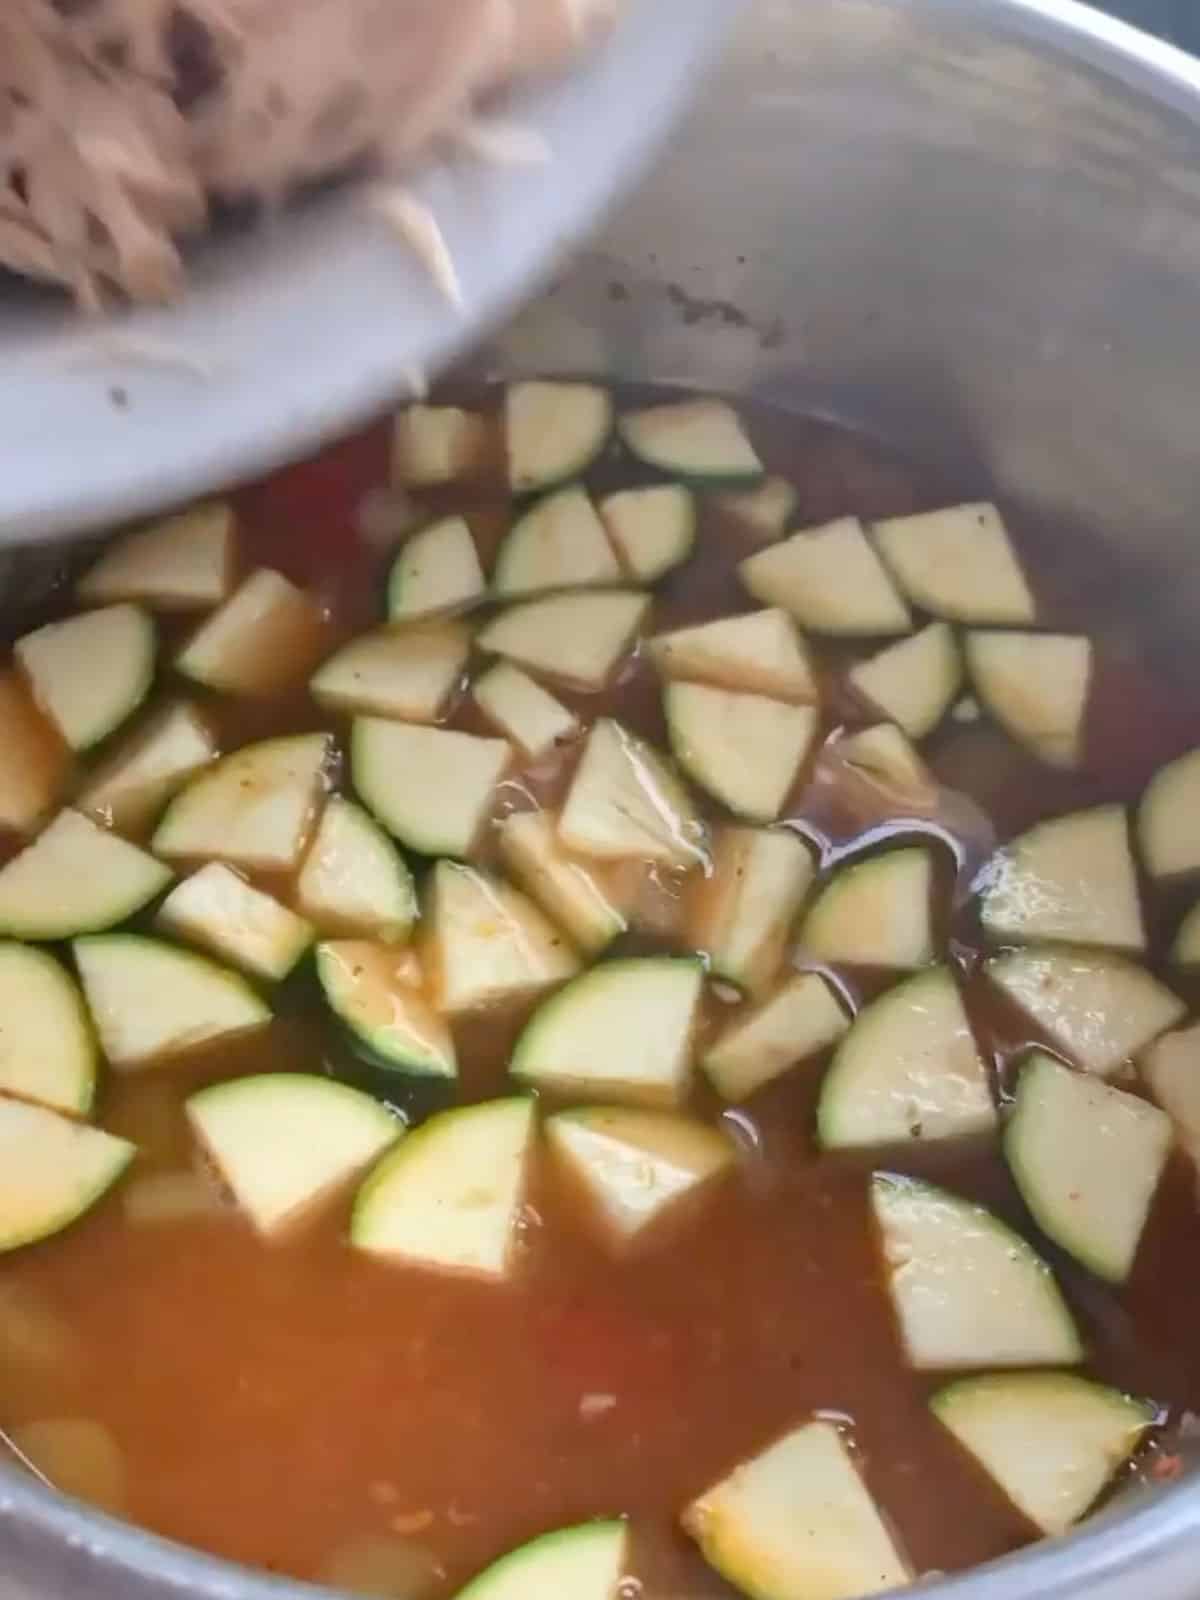 shredded chicken about to be poured into the pot which now has zucchini added to it.